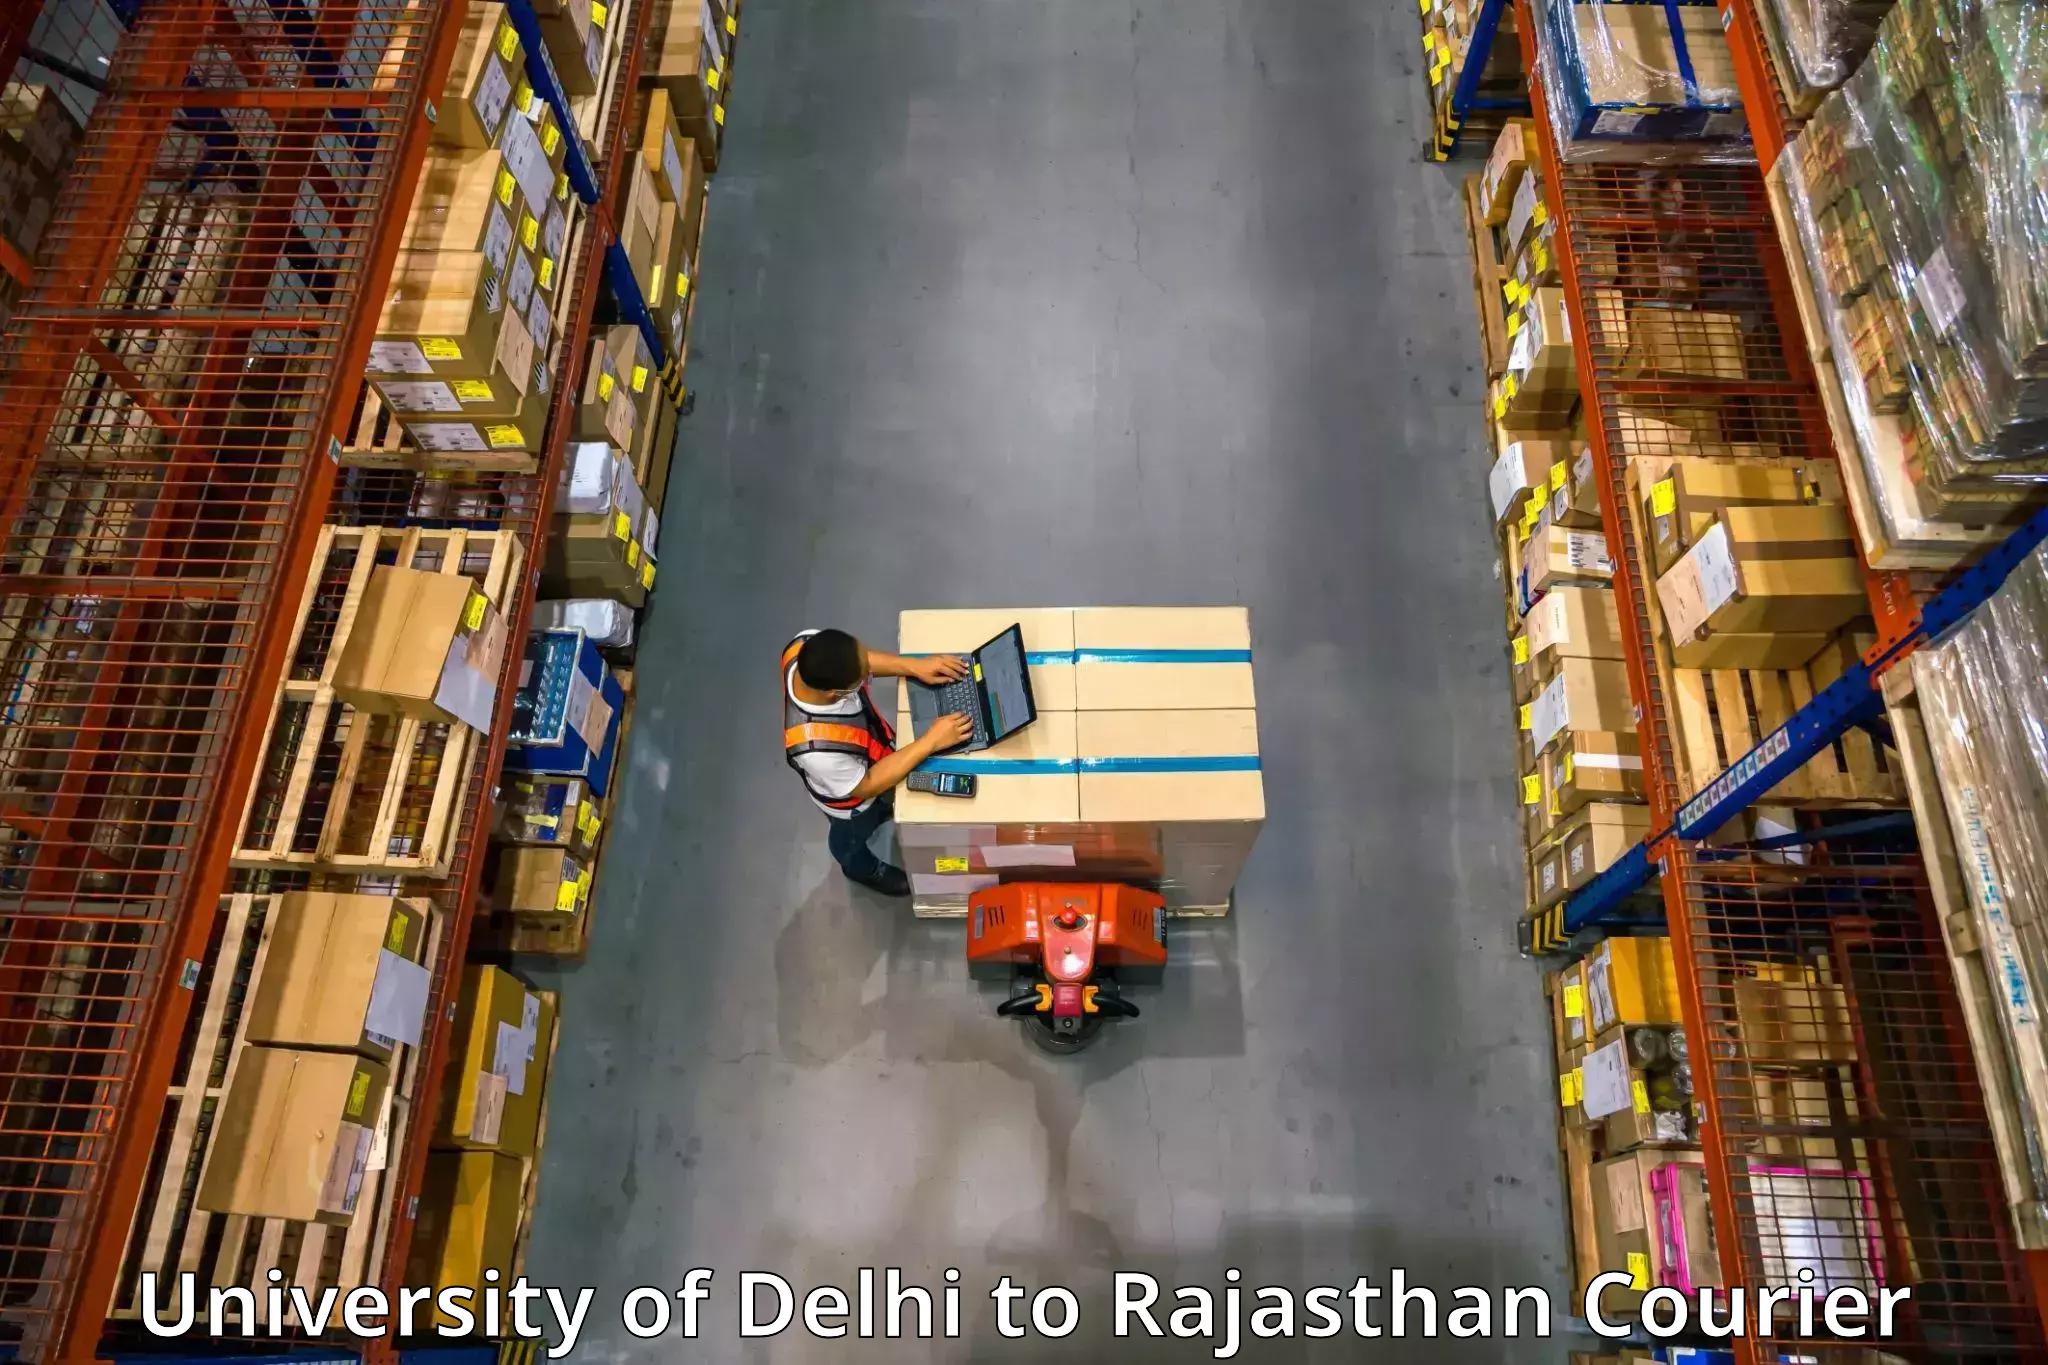 Furniture transport specialists University of Delhi to Rajasthan